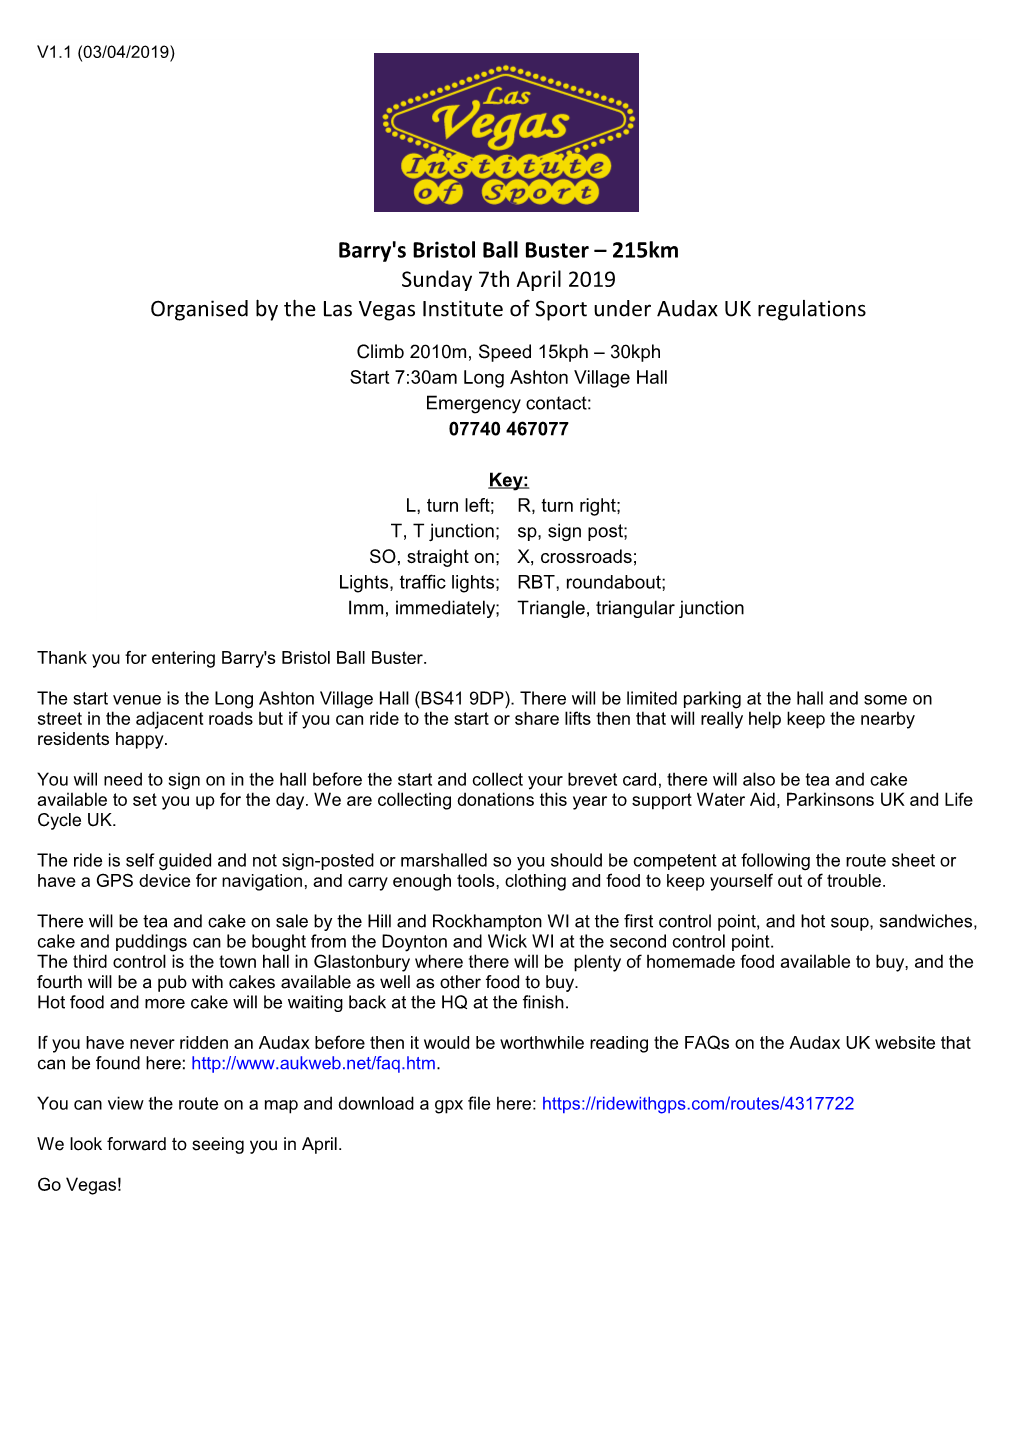 Barry's Bristol Ball Buster – 215Km Sunday 7Th April 2019 Organised by the Las Vegas Institute of Sport Under Audax UK Regulations